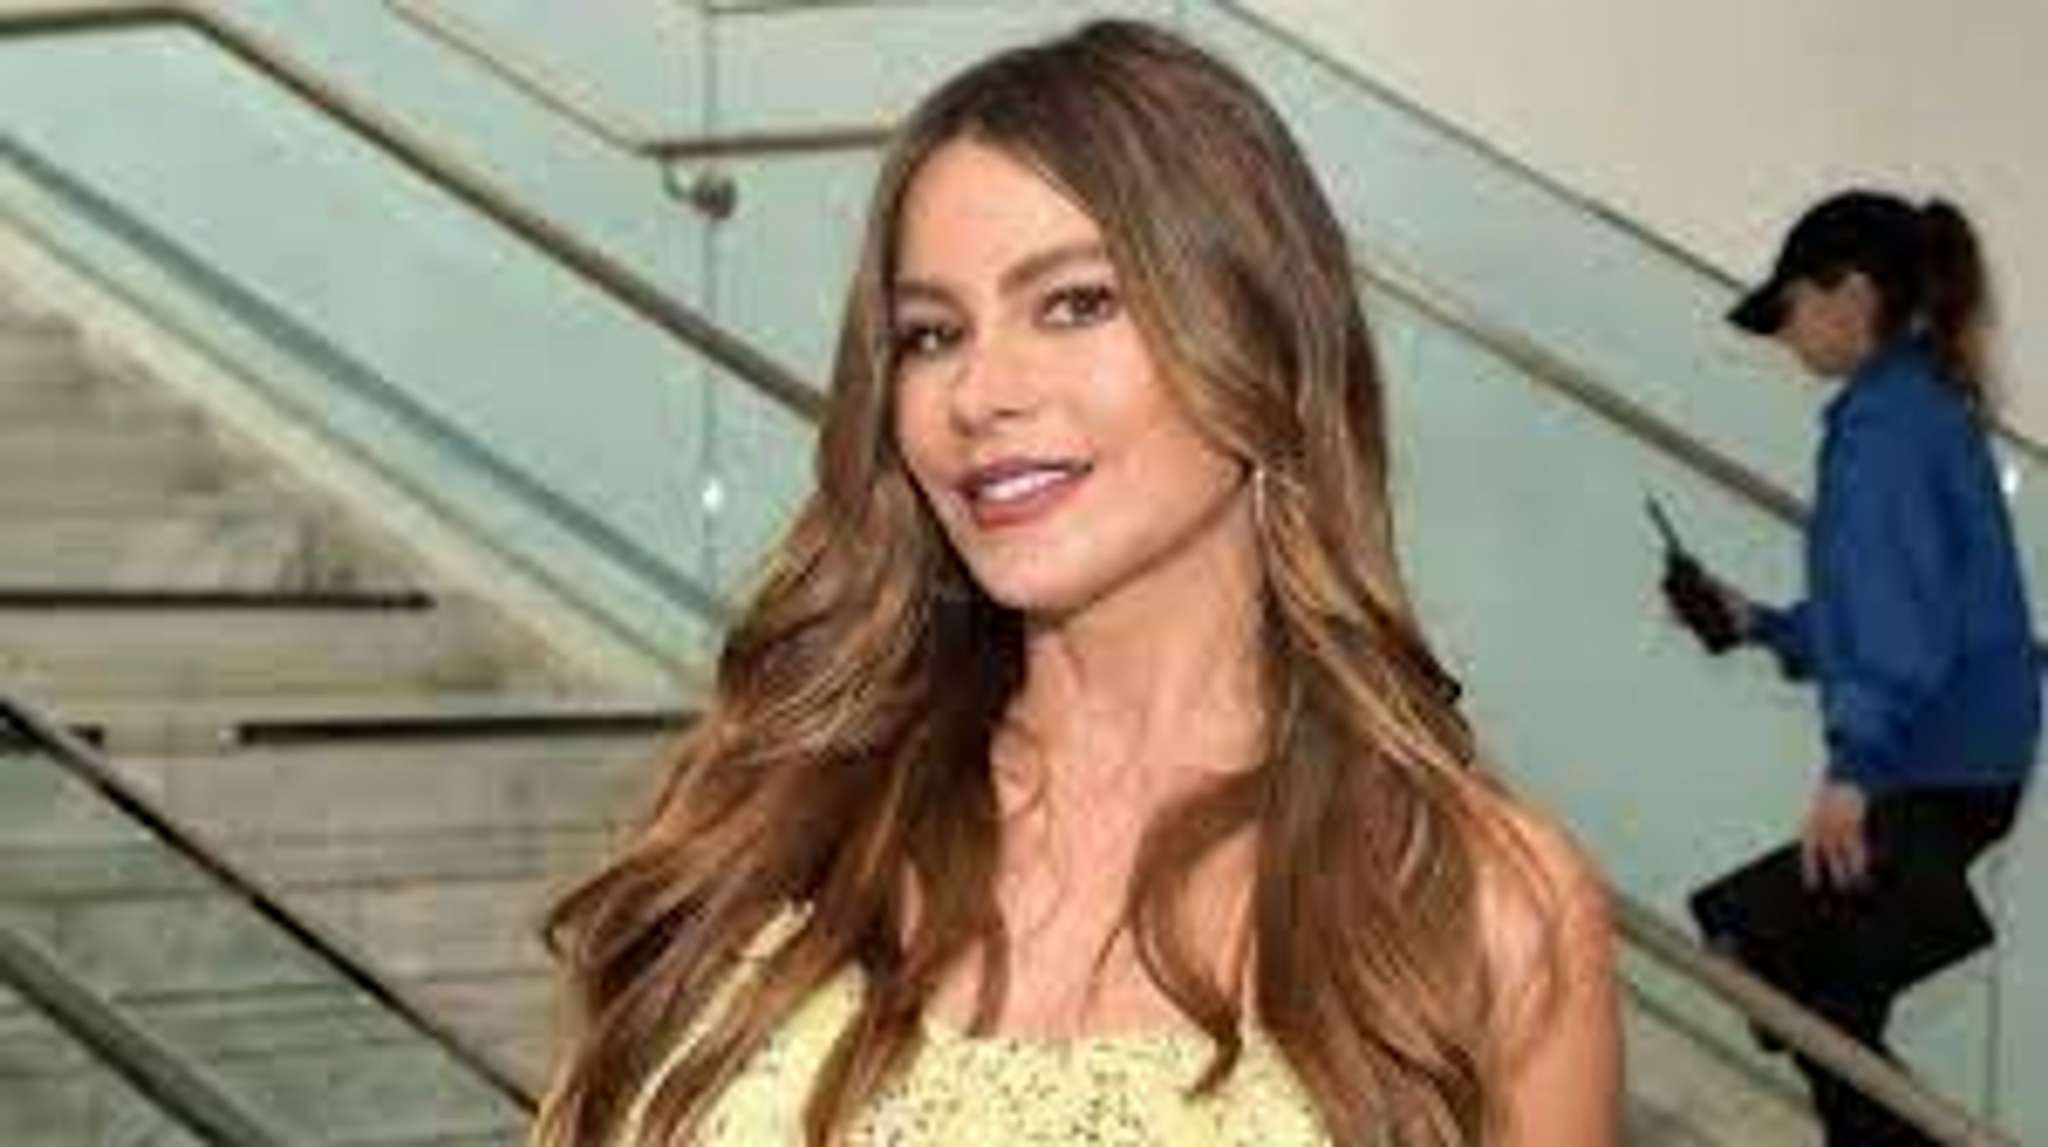 Sofia Vergara in a leopard print swimsuit shows off her perfect figure and tan